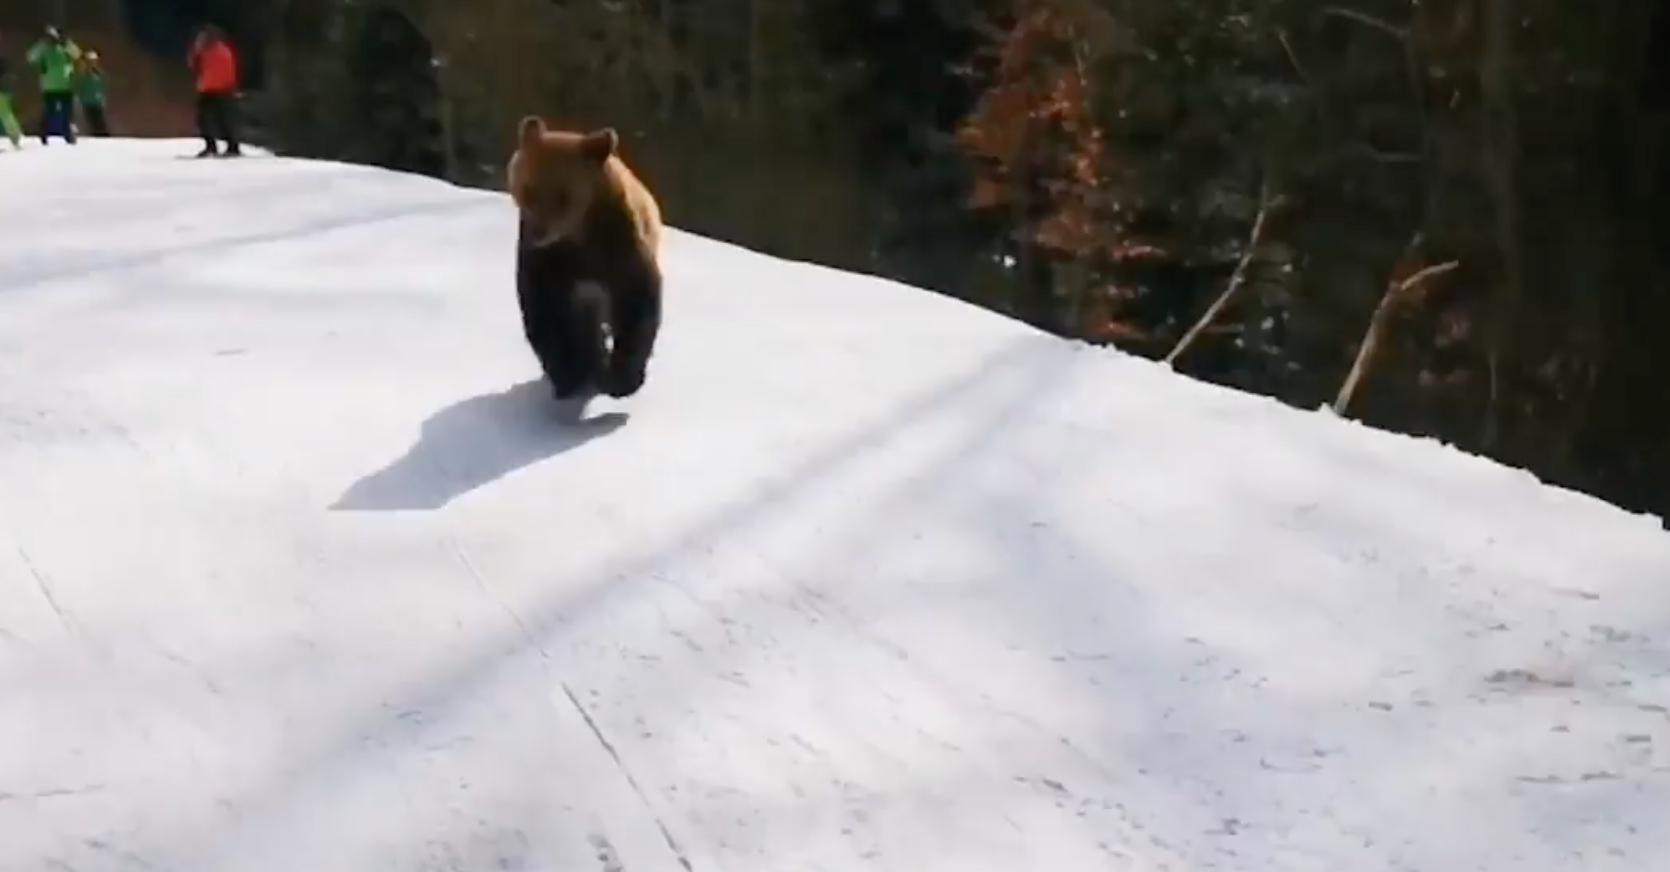 PHOTO: Ski instructor Adrian Stoica was chased by a bear at the Predeal Ski Resort in the Transylvanian mountains in Romania on Tuesday, March 9, 2021.